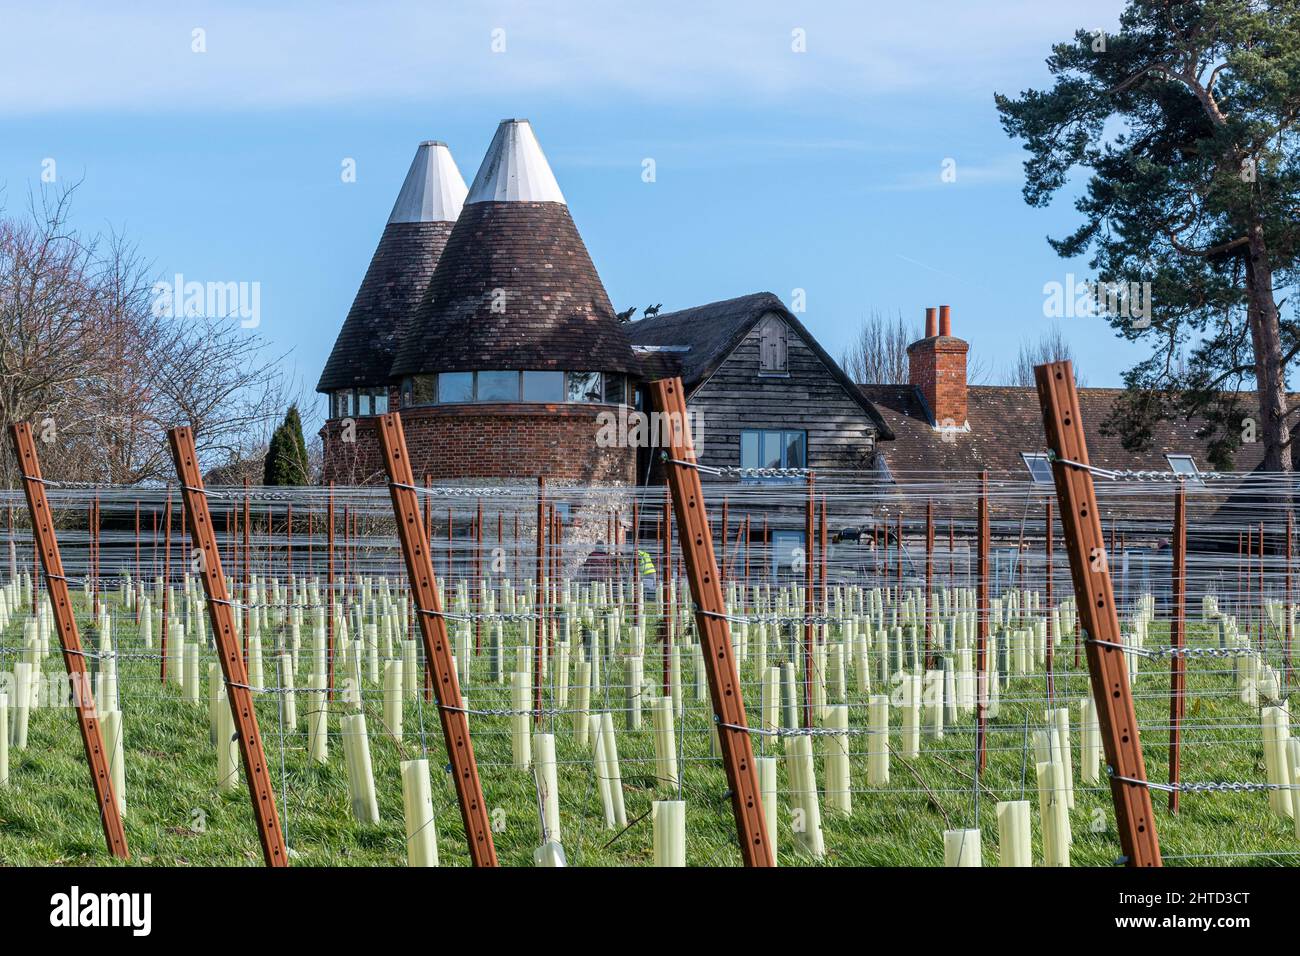 The Oast House at Hartley Wine Estate in Hampshire, England, UK, with rows of newly planted grape vines Stock Photo